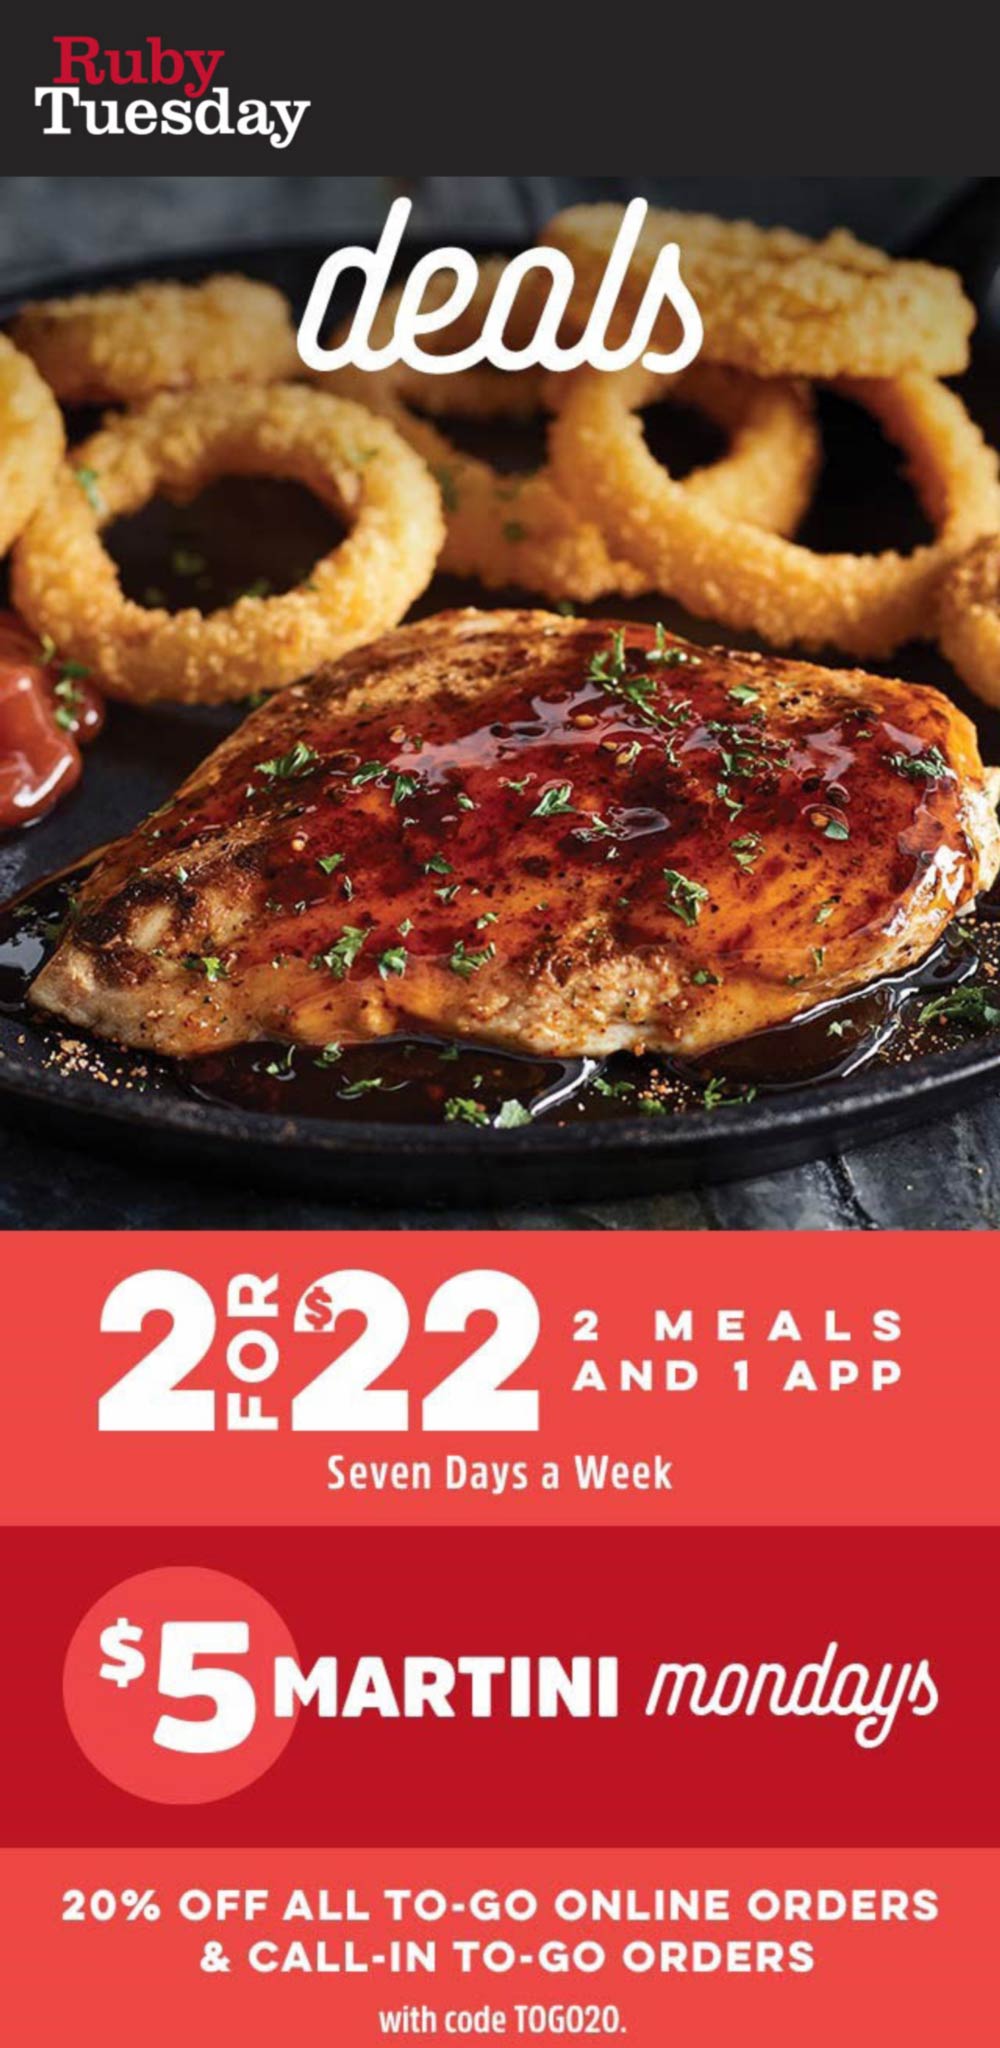 Ruby Tuesday restaurants Coupon  Appetizer + 2 entrees = $22 also 20% off takeout at Ruby Tuesday via promo code TOGO20 #rubytuesday 